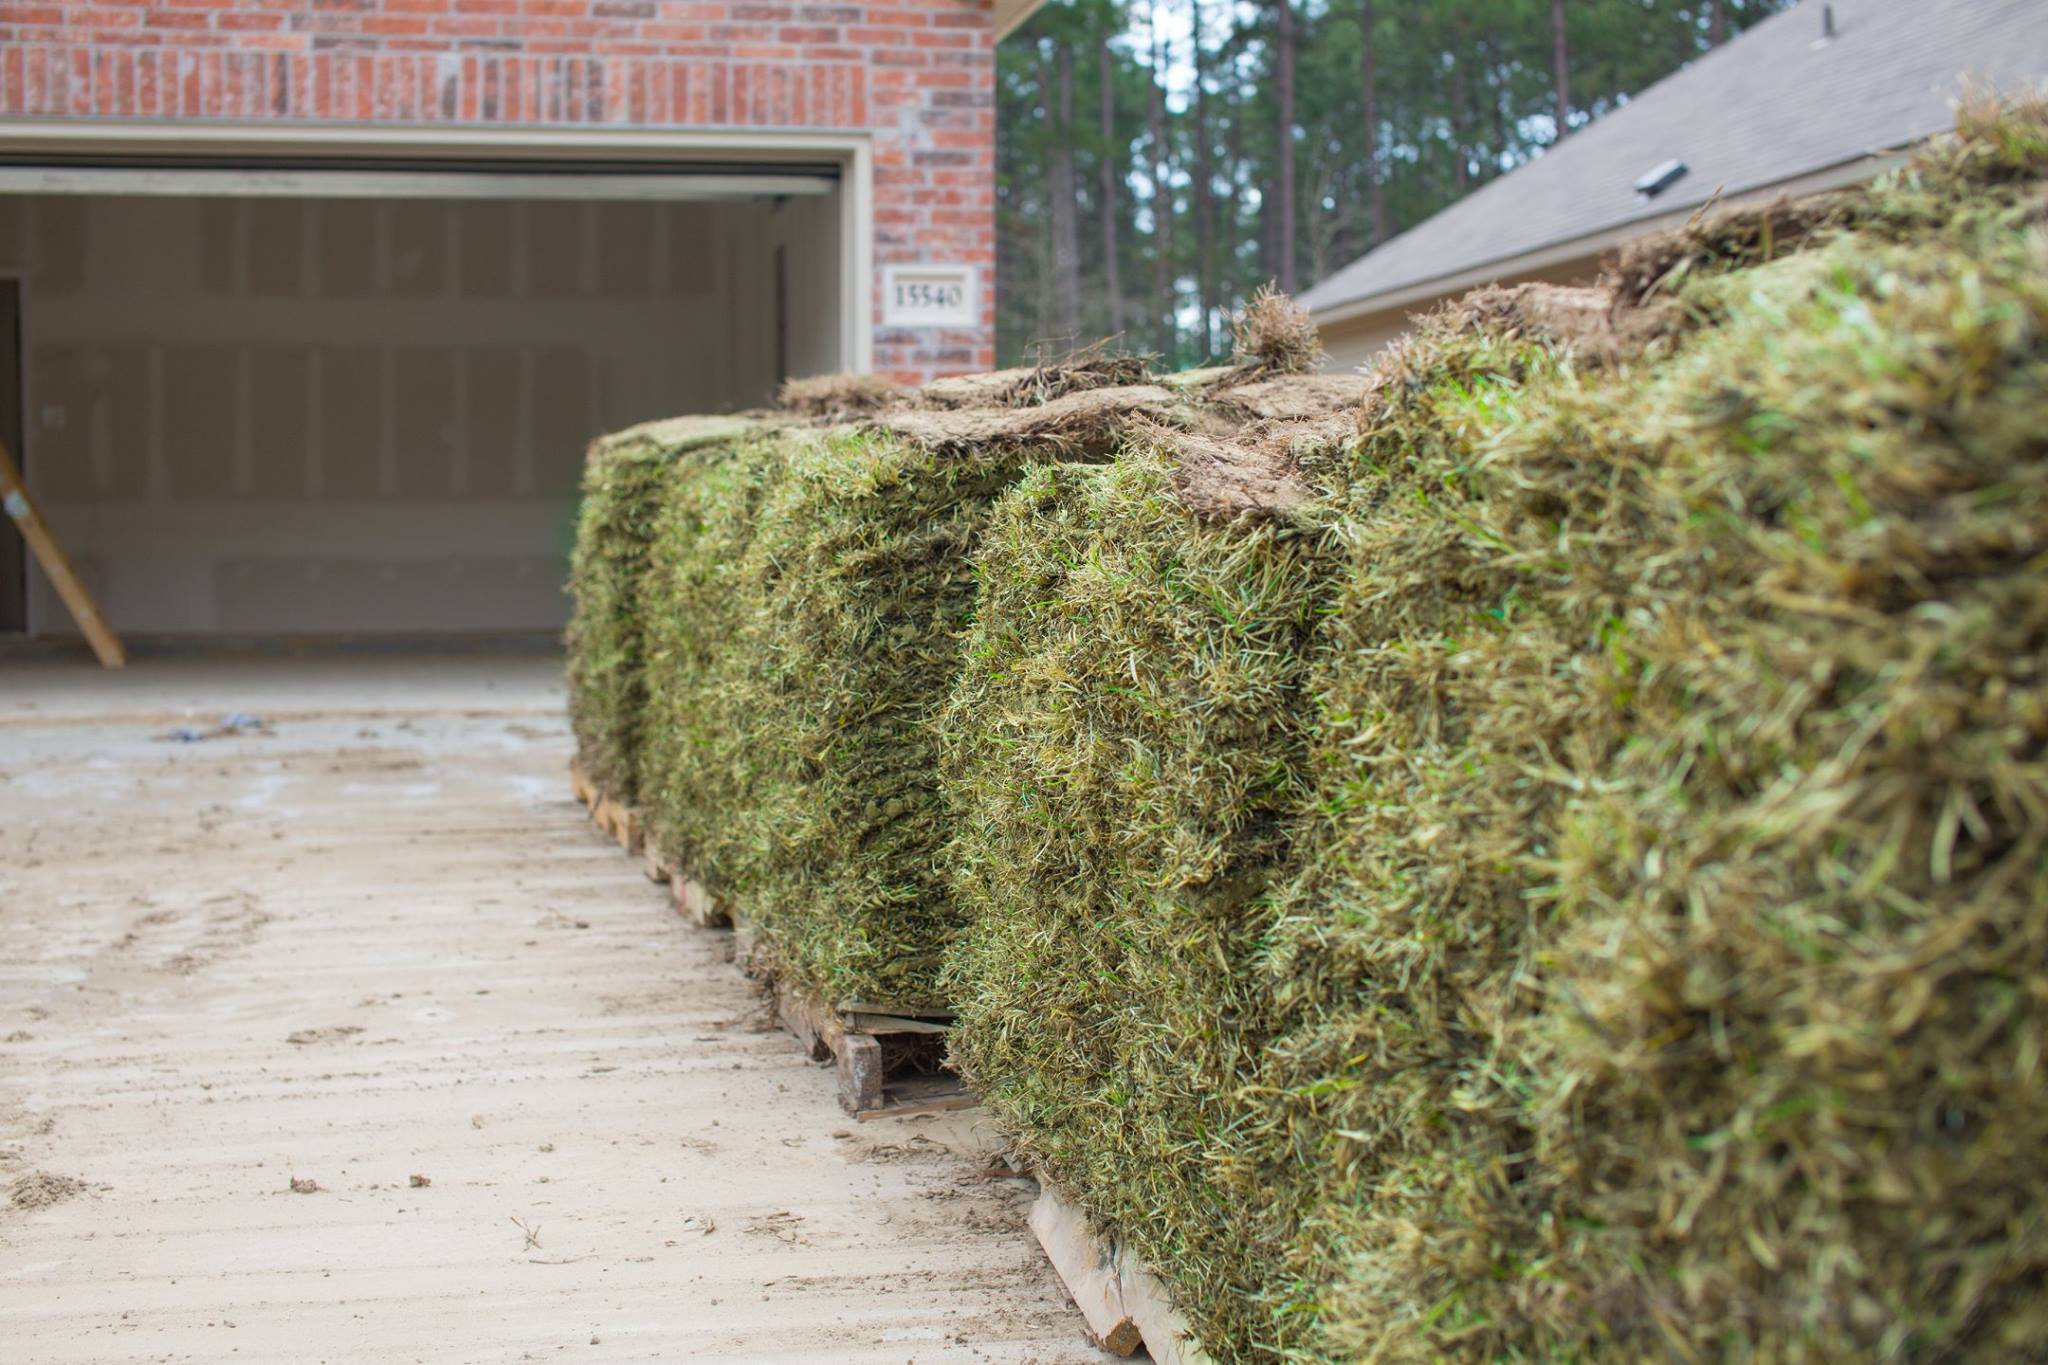   Sod Sales &amp; Installation   Where the Grass is Always Greener   Get a Free Estimate  